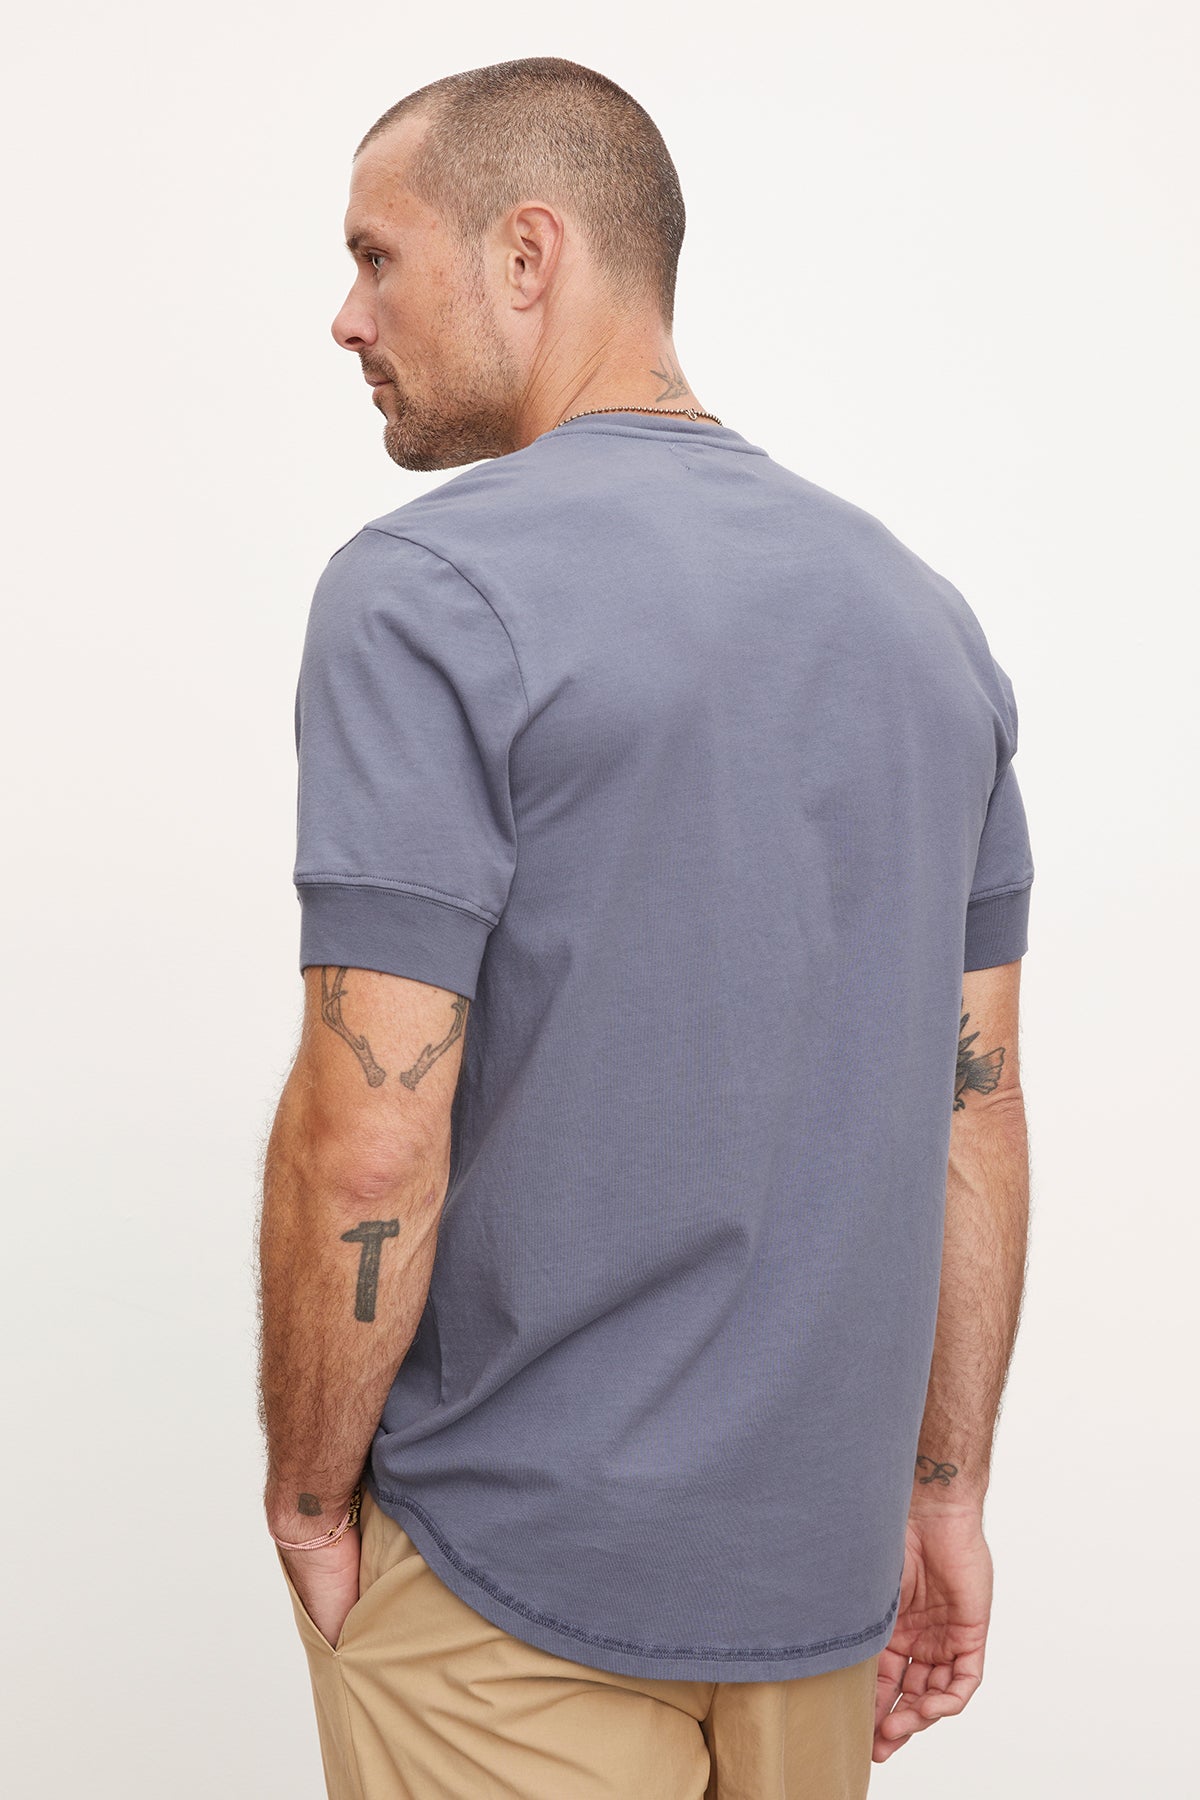   A man in a Velvet by Graham & Spencer DEON Henley t-shirt with scooped hem and beige pants, viewed from the side as he looks to the left, displaying tattoos on his arms. 